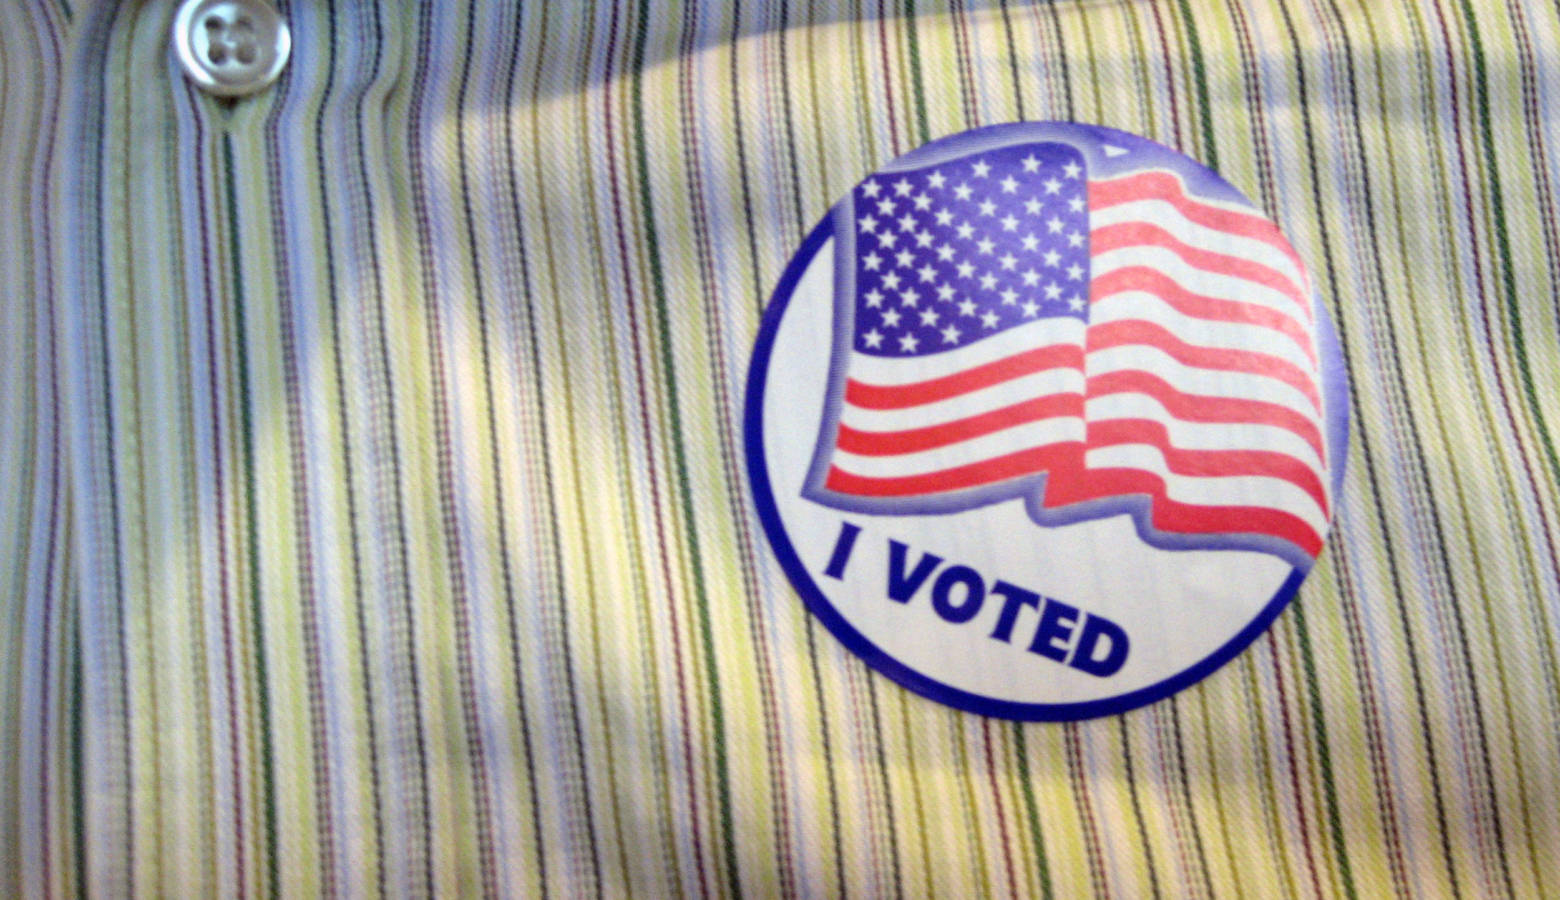 Under Indiana law, you have to provide a reason you can’t vote on Election Day to get an absentee ballot. (Daniel Morrison/Flickr)